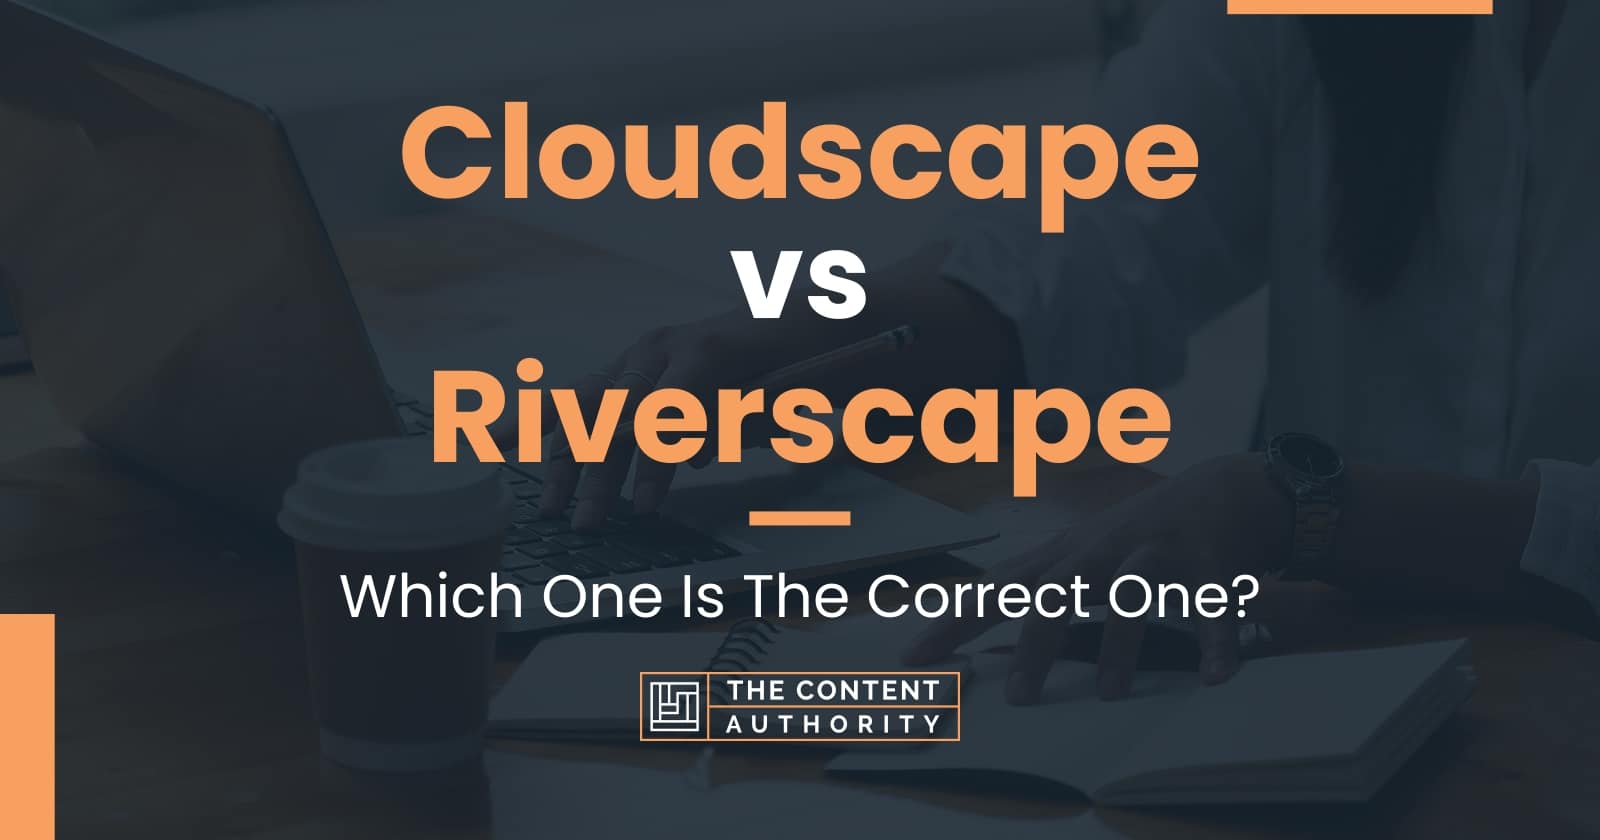 Cloudscape vs Riverscape: Which One Is The Correct One?